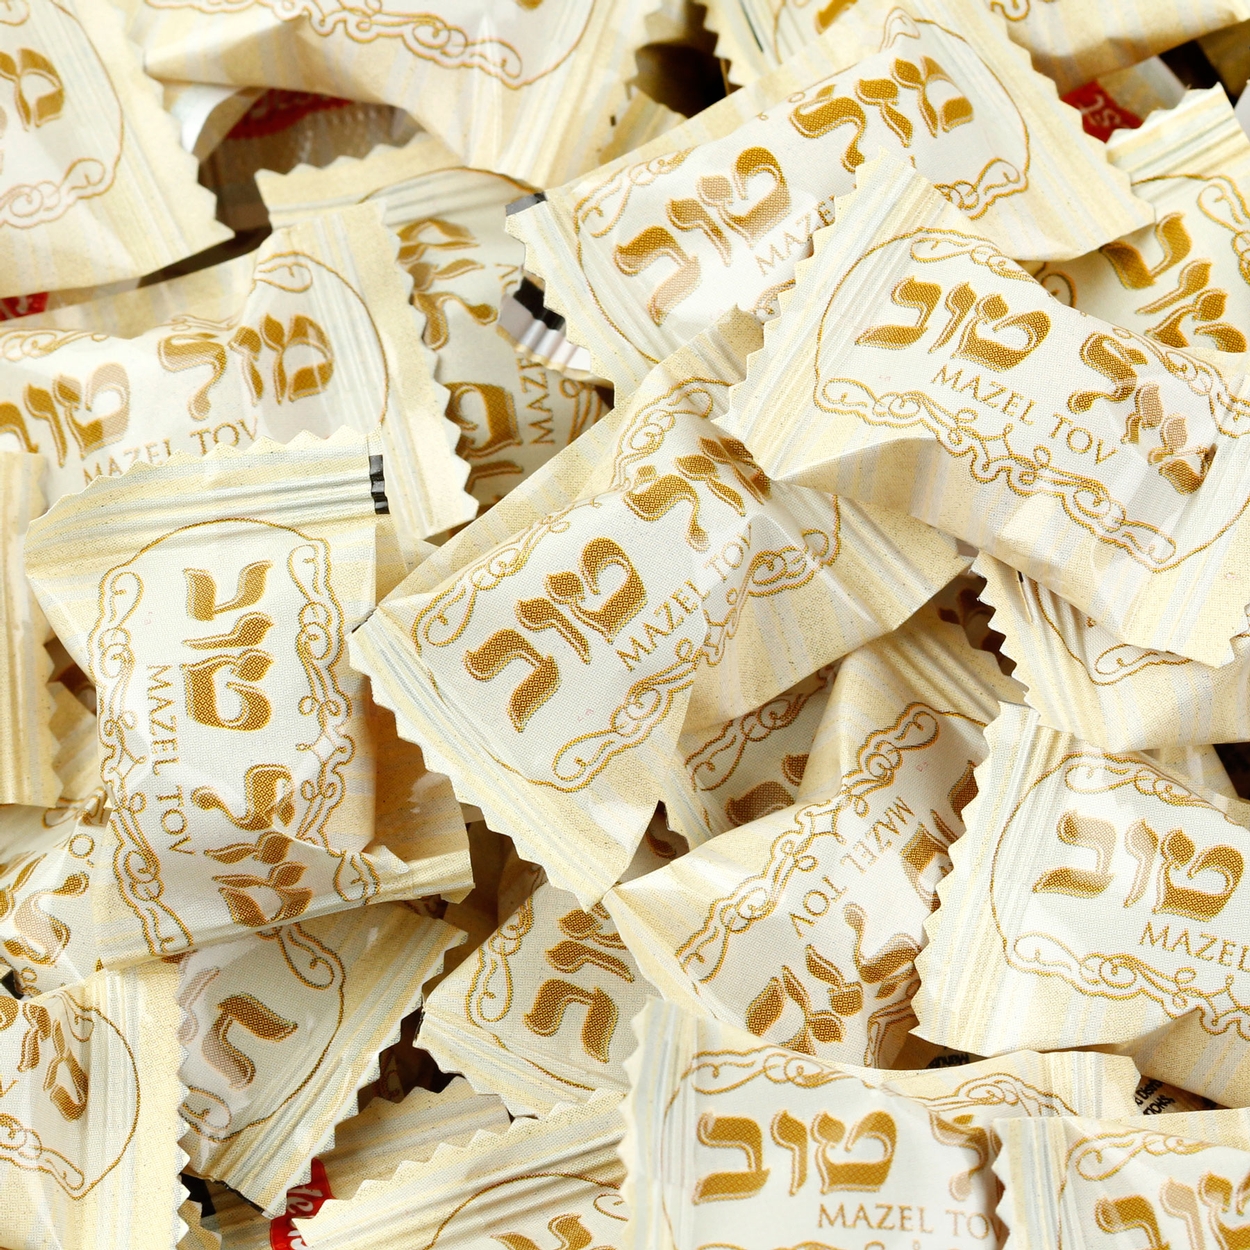 Mazel Tov Hard Candy • Wedding Candy • Wedding Gifts, Favors & Candy ...